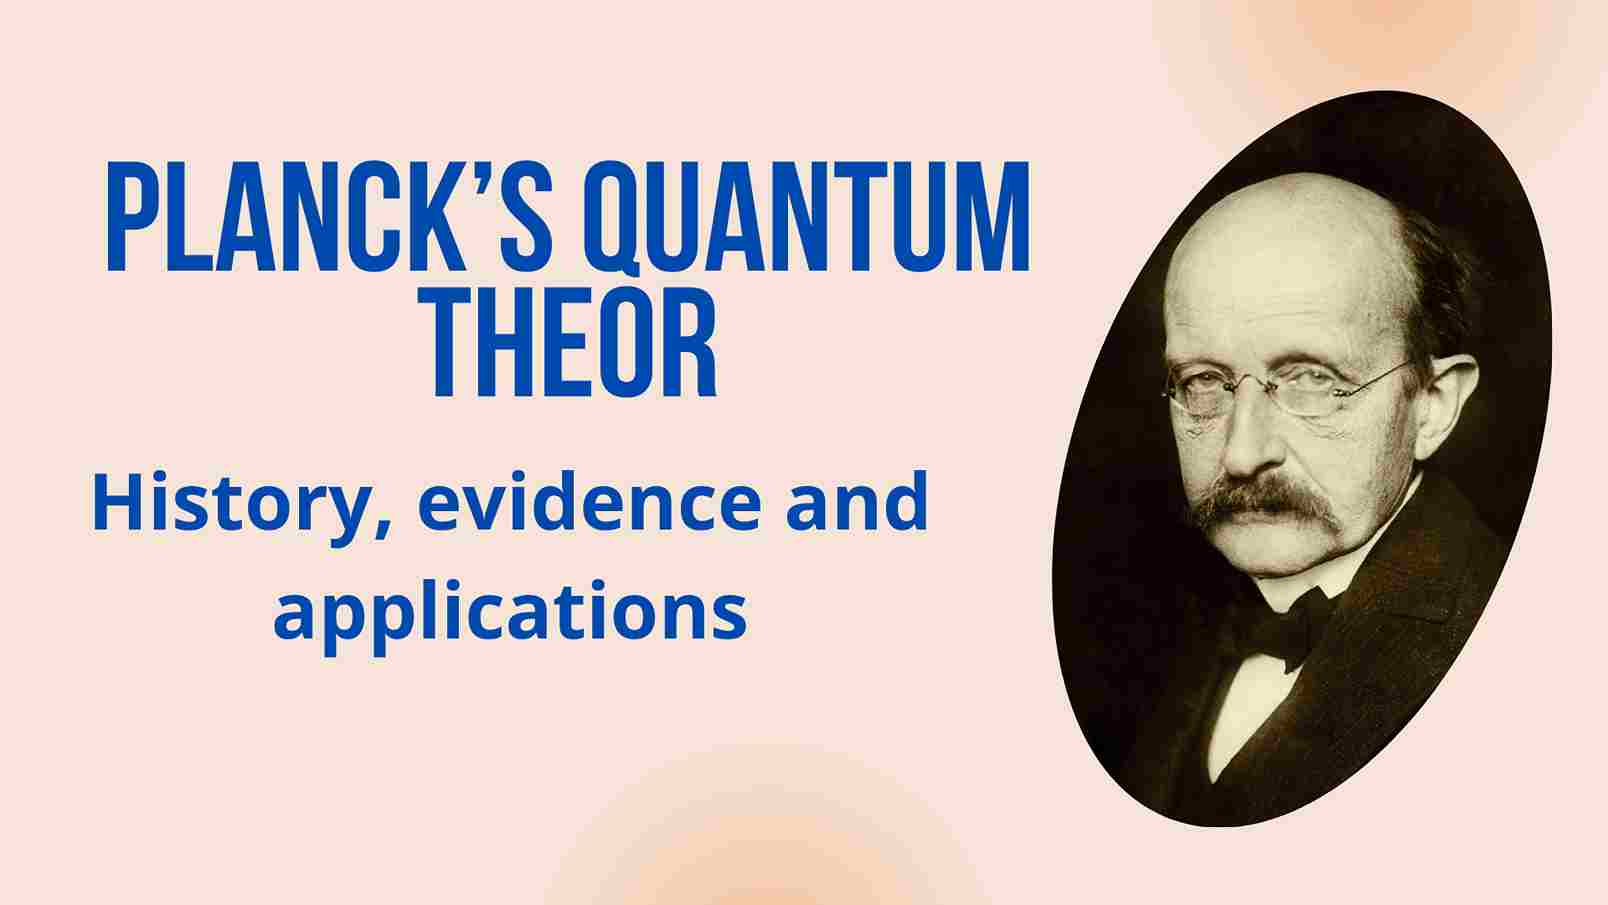 Planck’s quantum theory-History, evidence and applications